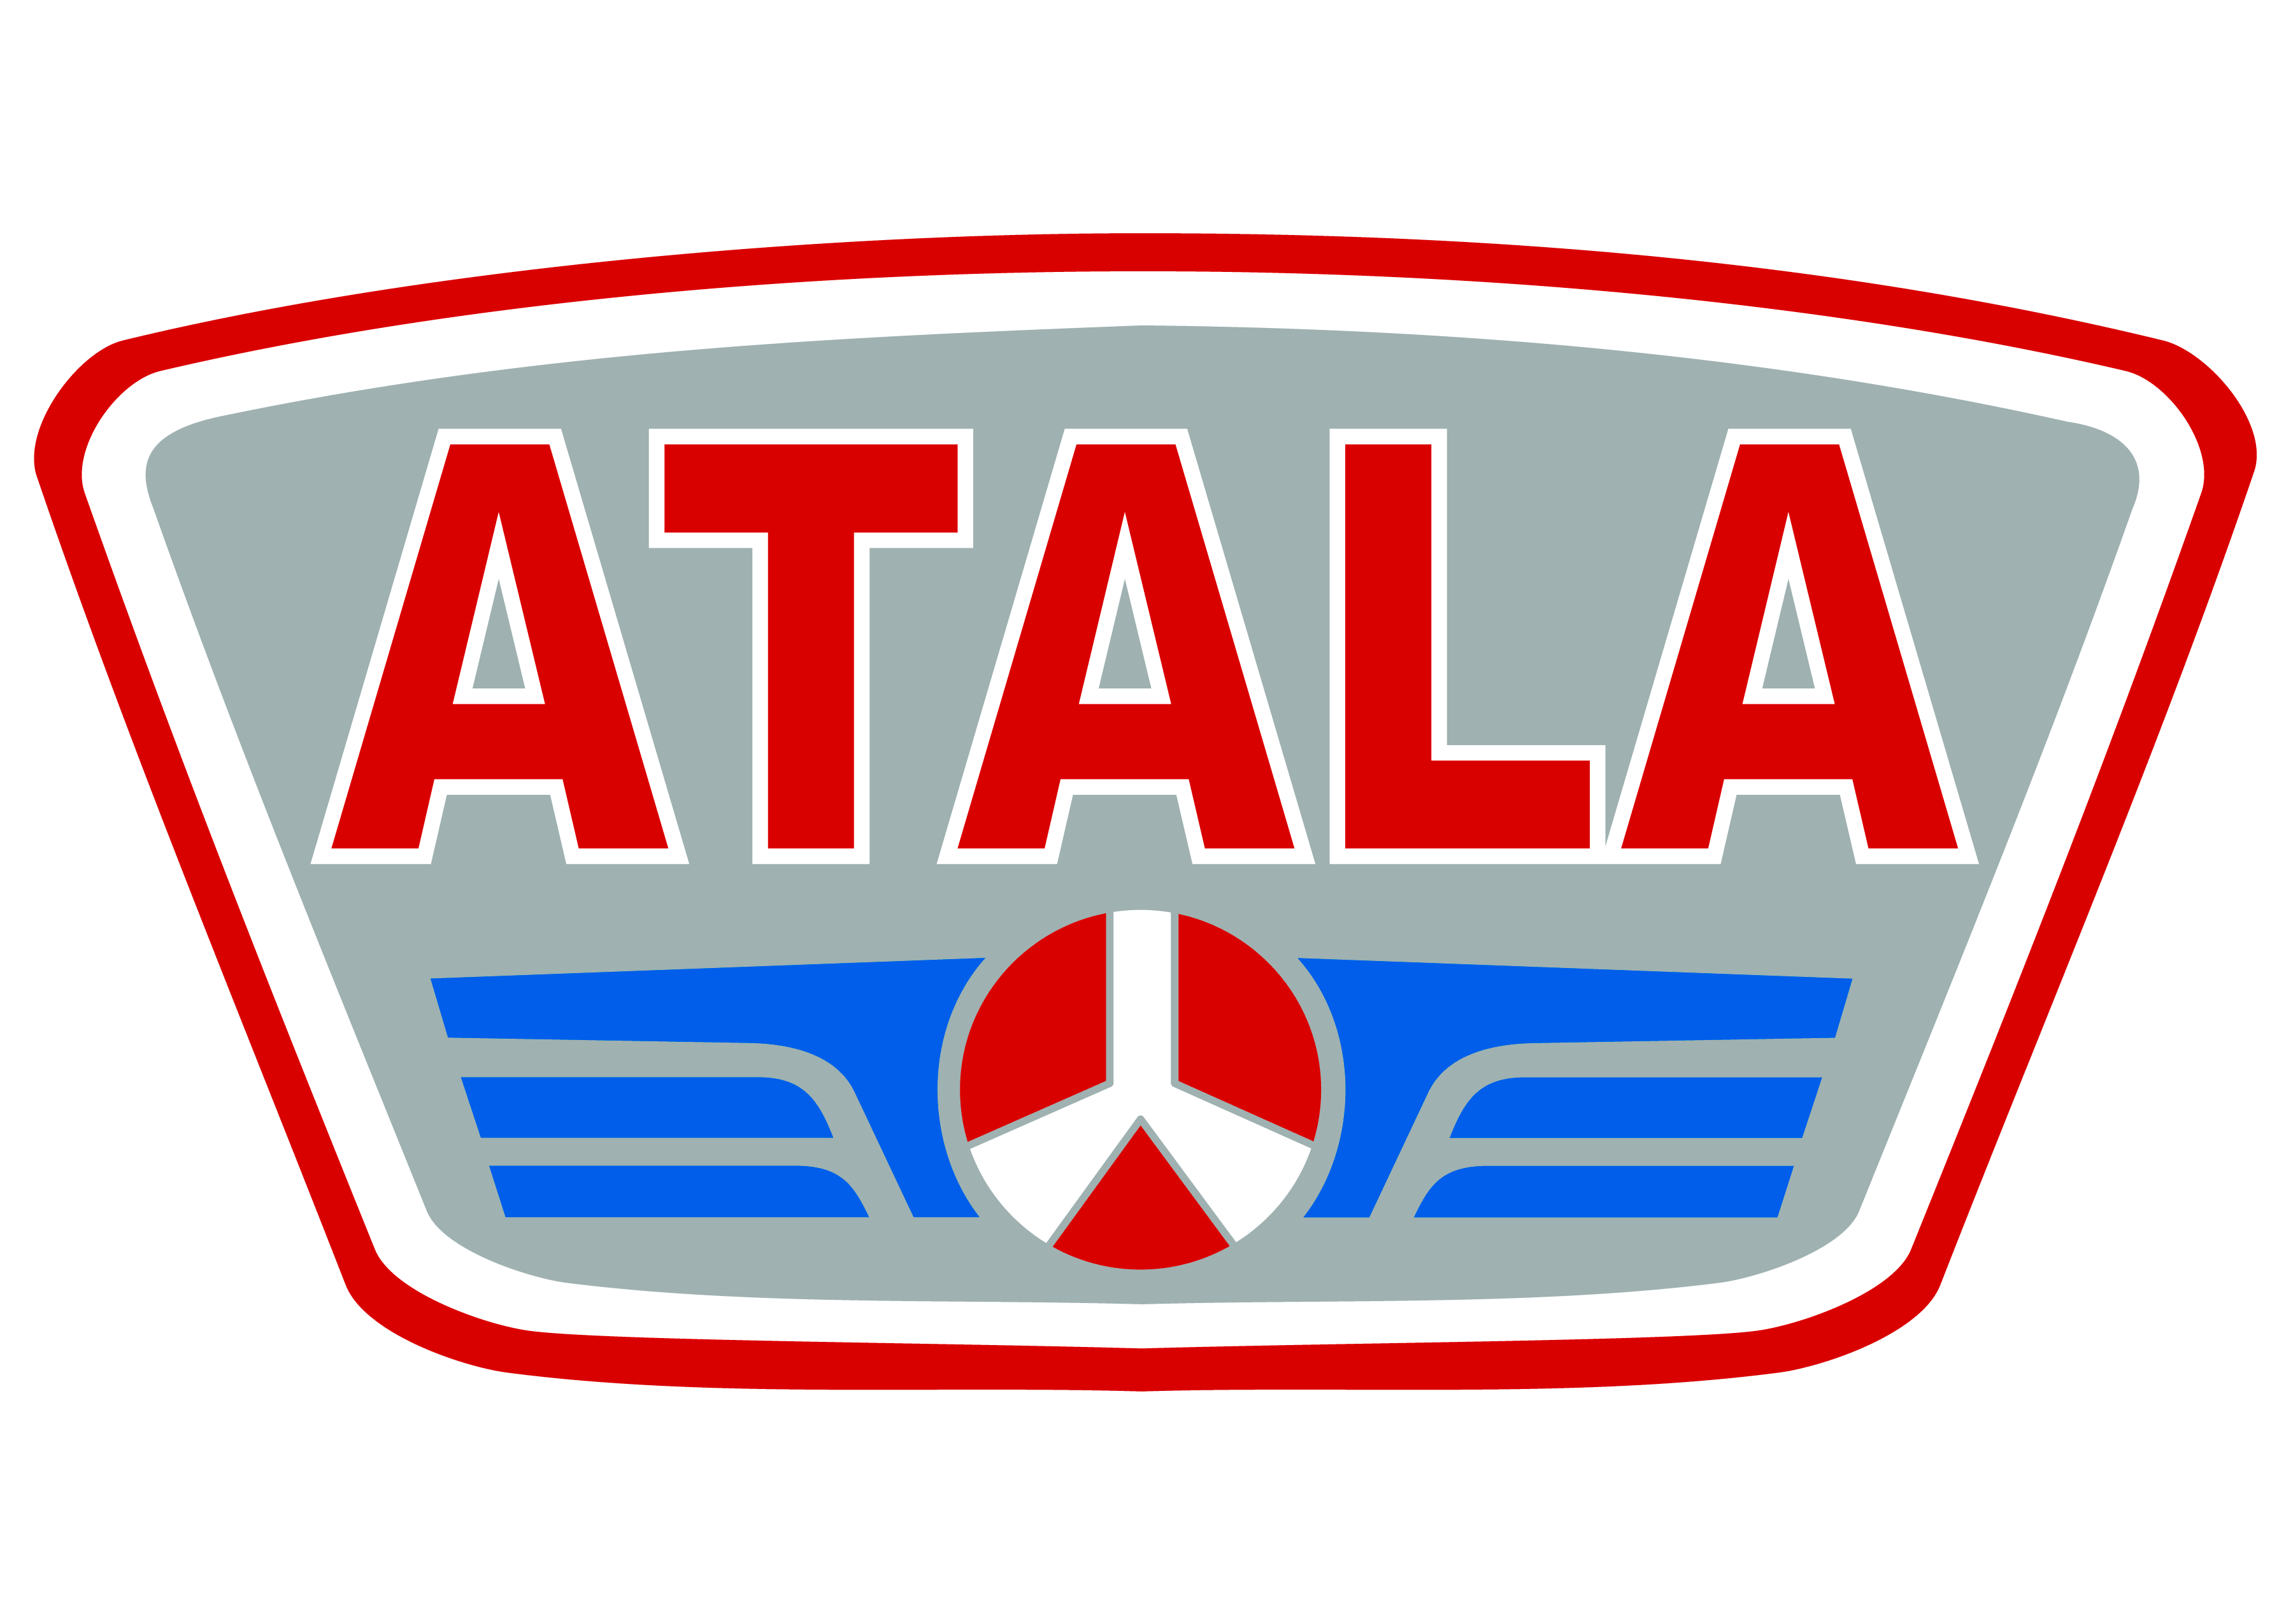 Options and accessories for the Atala AT 12 50 Hacker AC - 1997